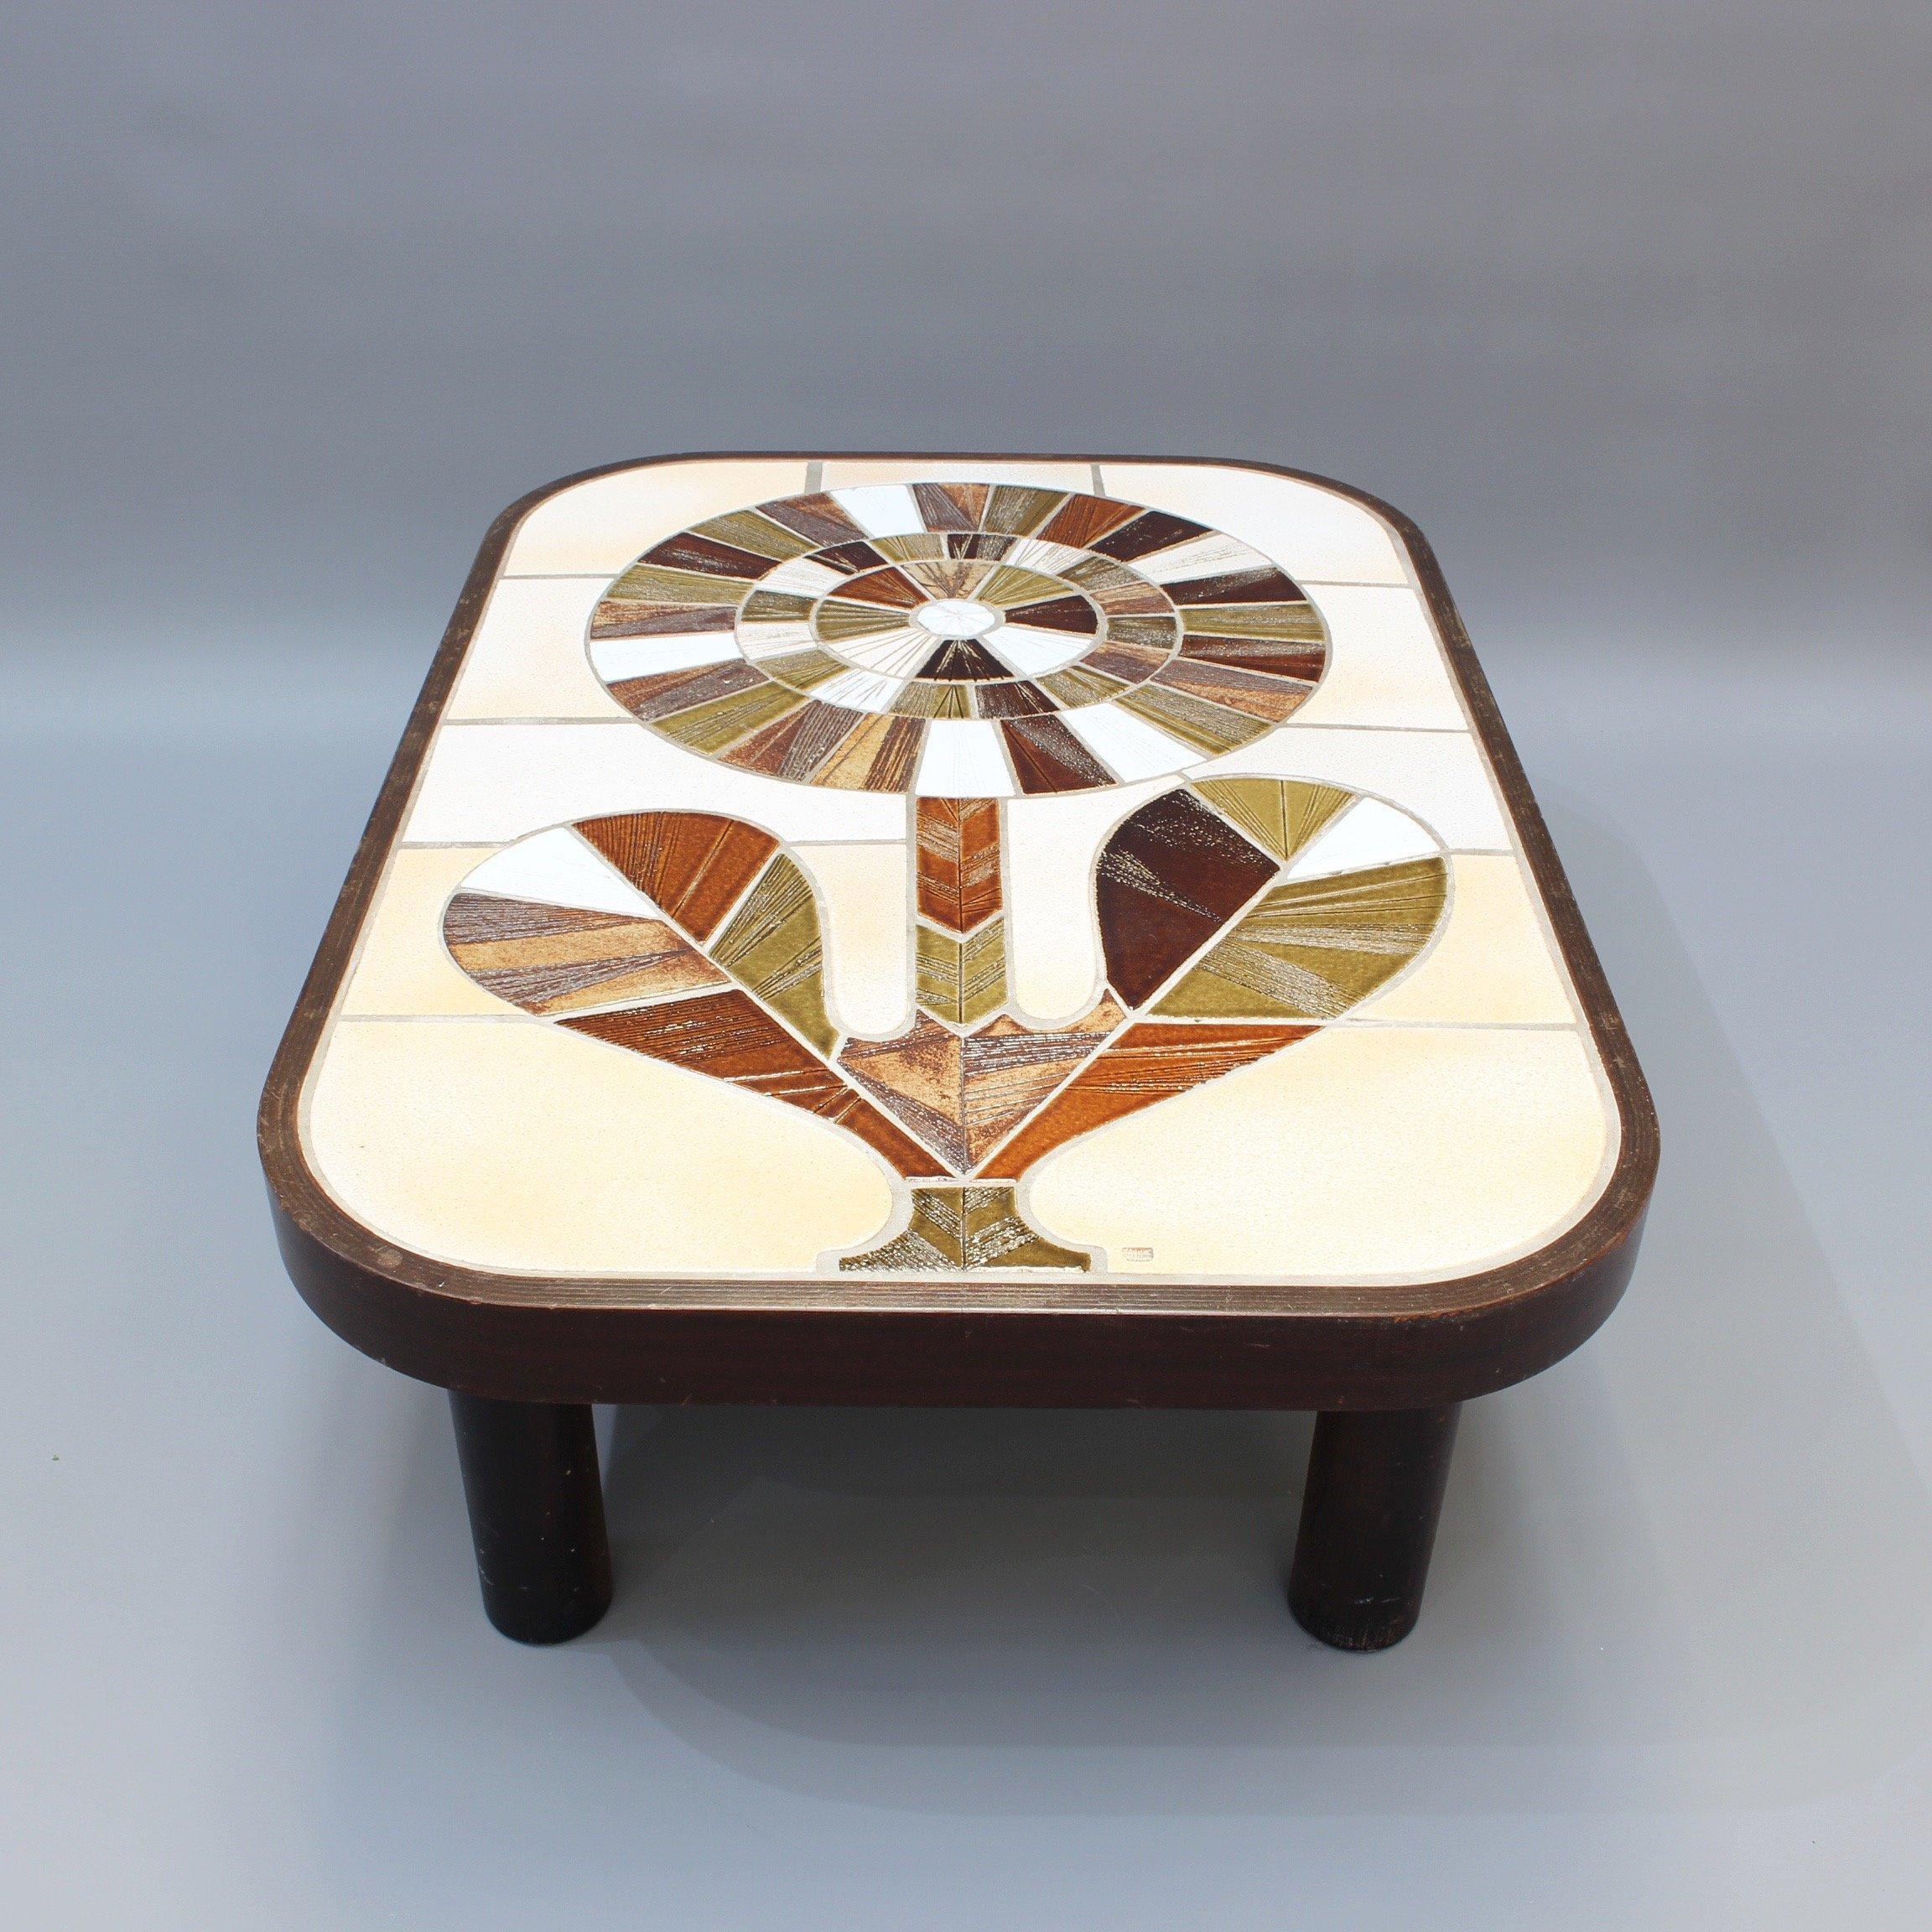 Ceramic tiled coffee table by Roger Capron (circa 1970s). A large, stylised flower is the centre piece of this original work by famed Vallauris ceramicist, Roger Capron (1922 - 2006). The tiles are surrounded by the table's dark wooden frame with